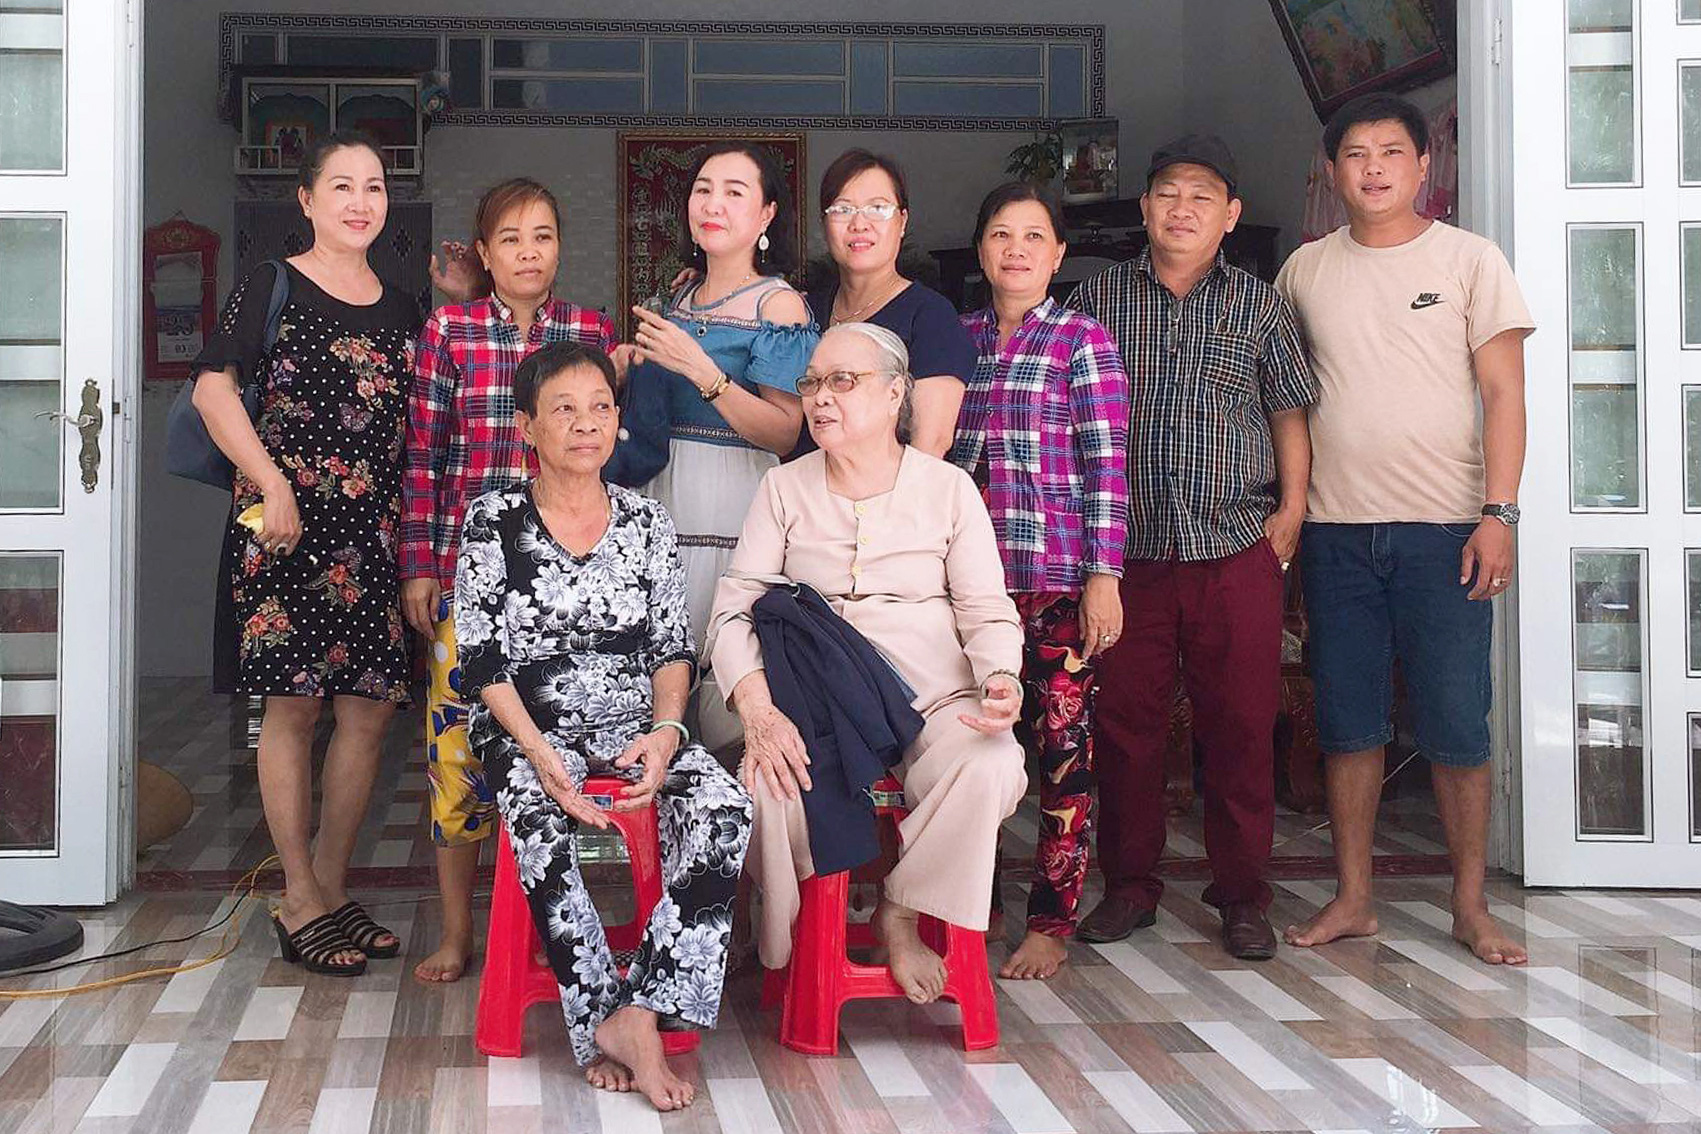 Back from the dead: Vietnamese woman returns home after 50 years